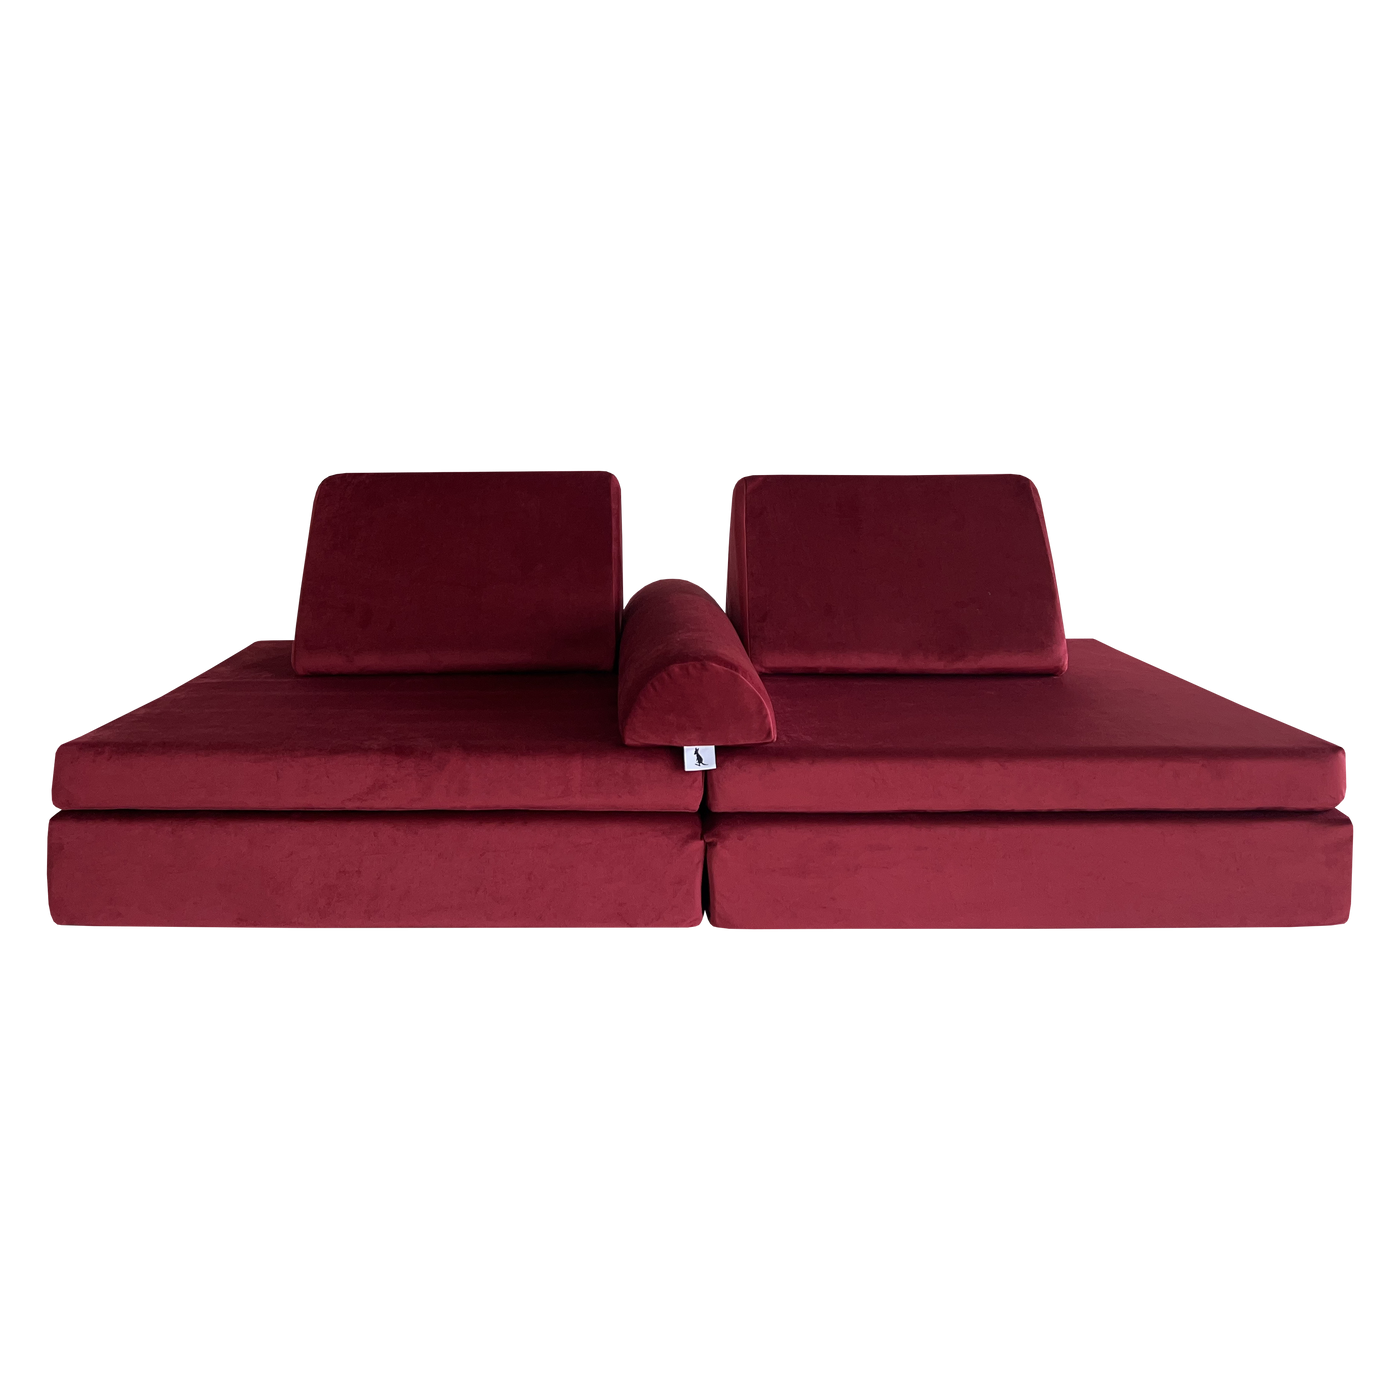 Jewel Tone Play Couch Cover Set